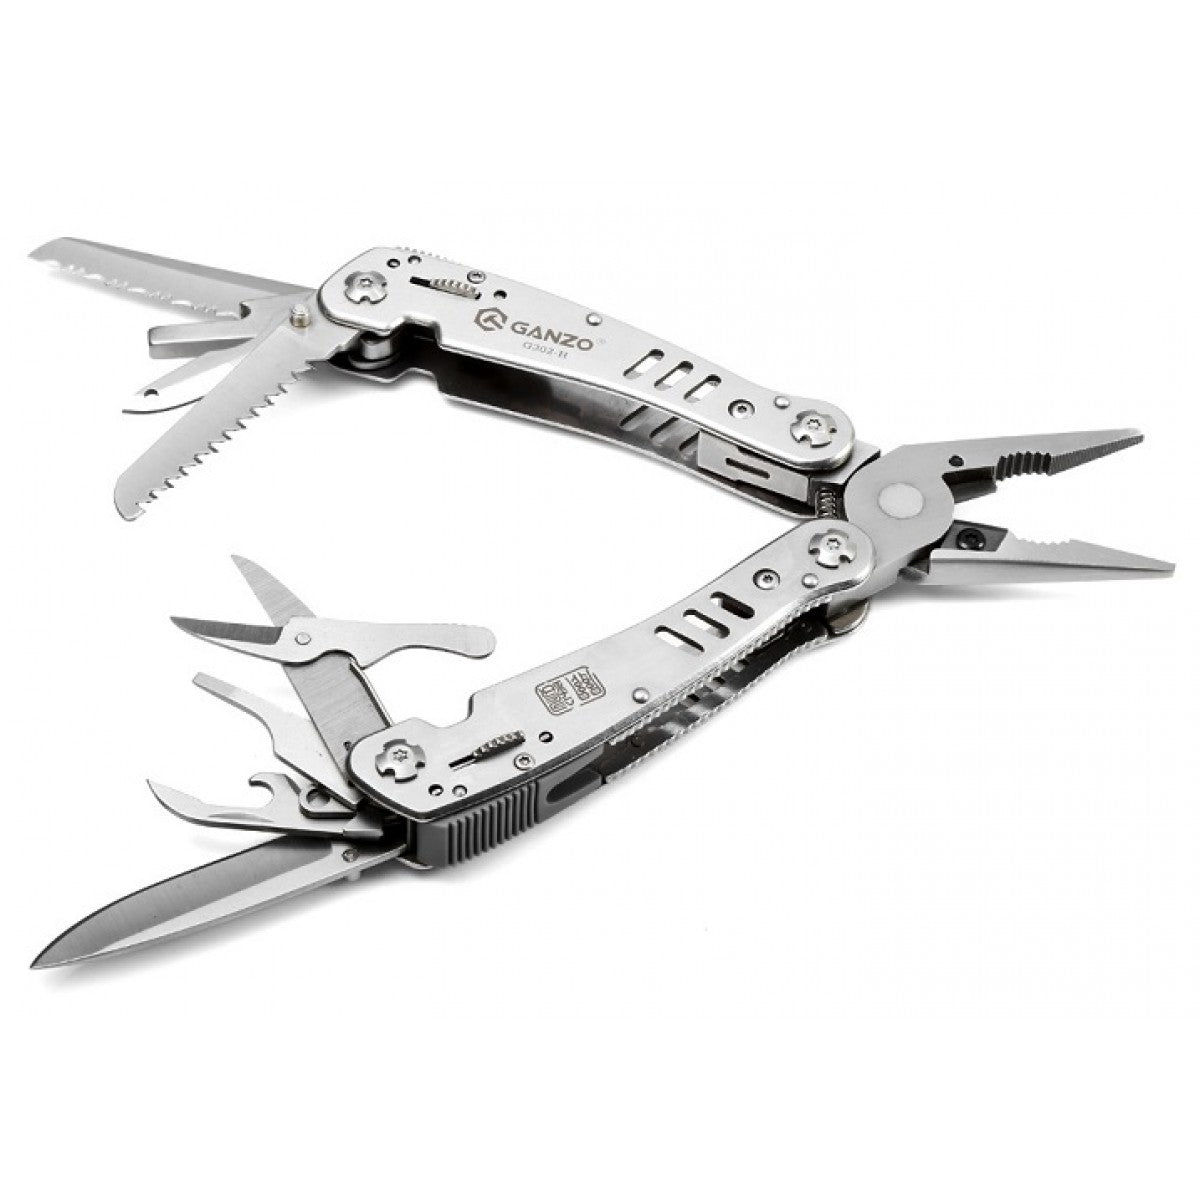 Ganzo G302-H Multitools Pliers with Bits